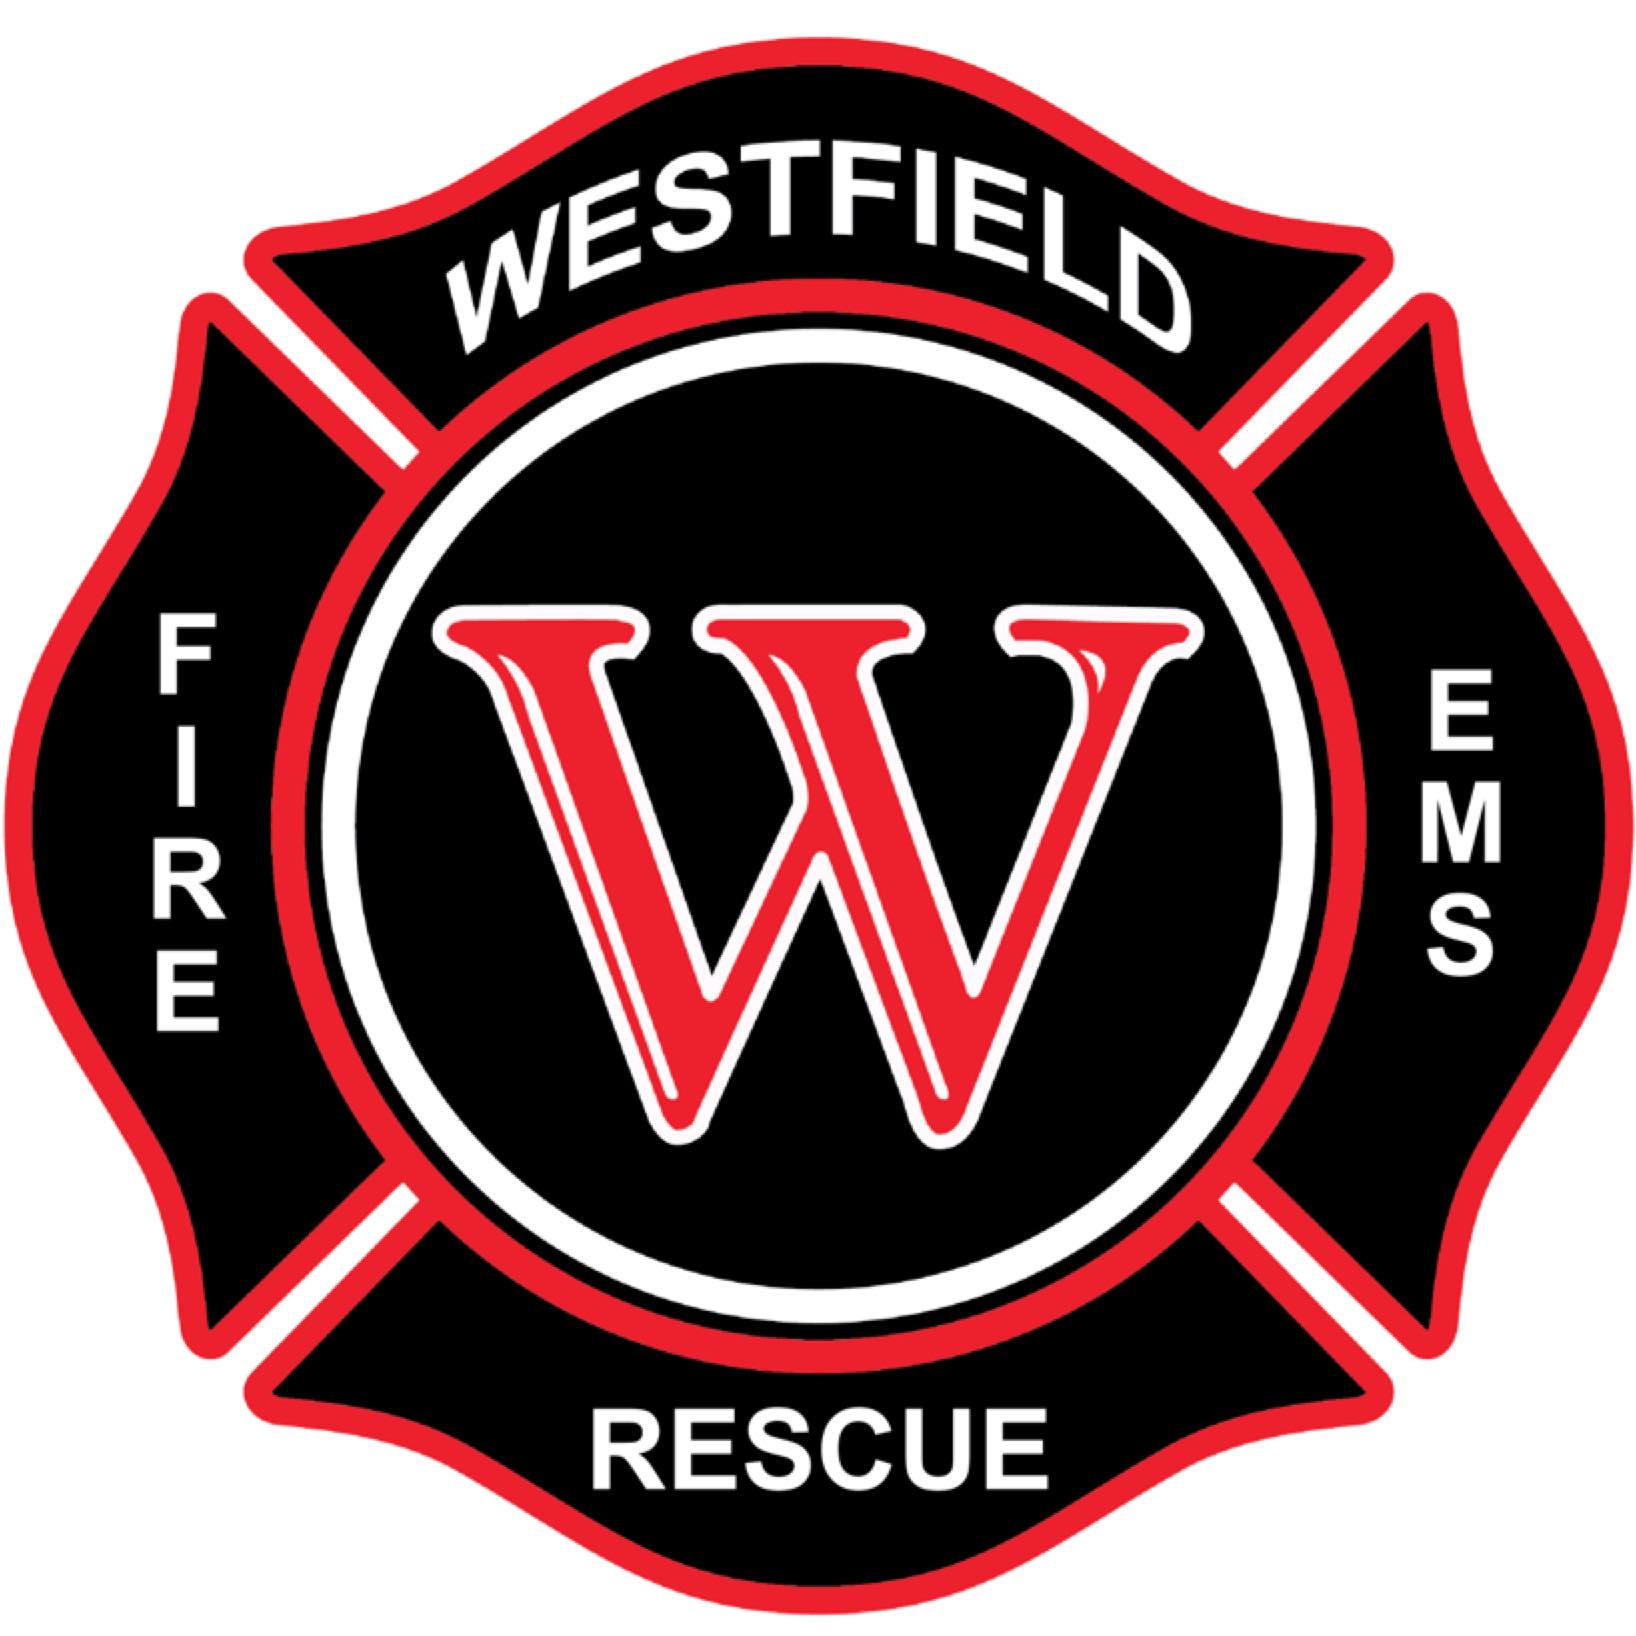 Westfield Fire Department asks property owners to check for water damage